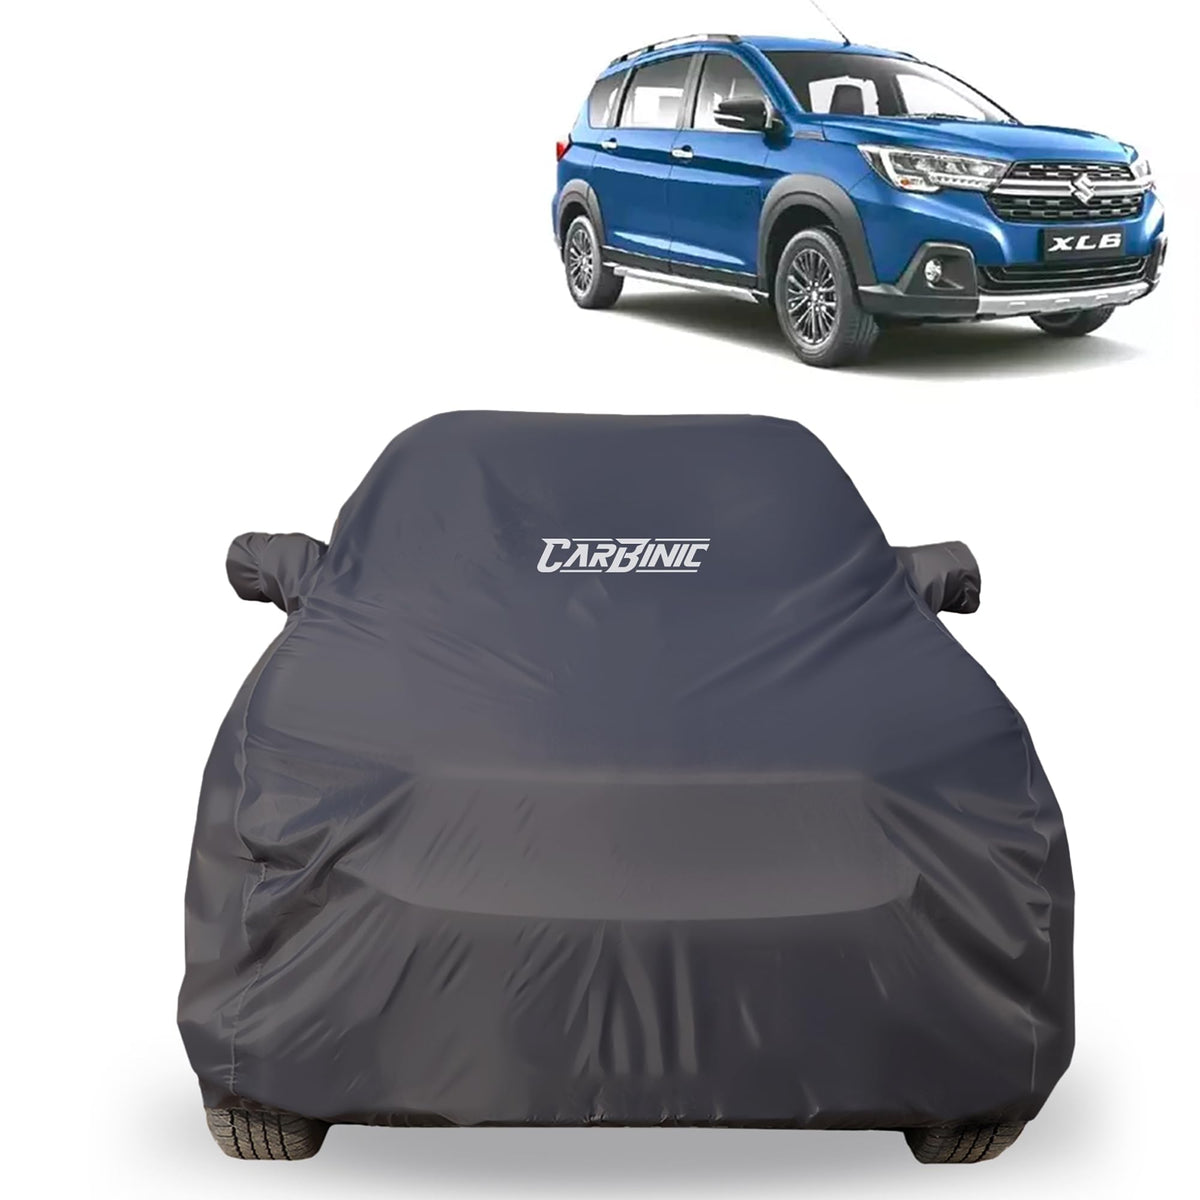 CARBINIC Car Body Cover for Maruti Ignis 2017 | Water Resistant, UV Protection Car Cover | Scratchproof Body Shield | All-Weather Cover | Mirror Pocket & Antenna | Car Accessories Dusk Grey